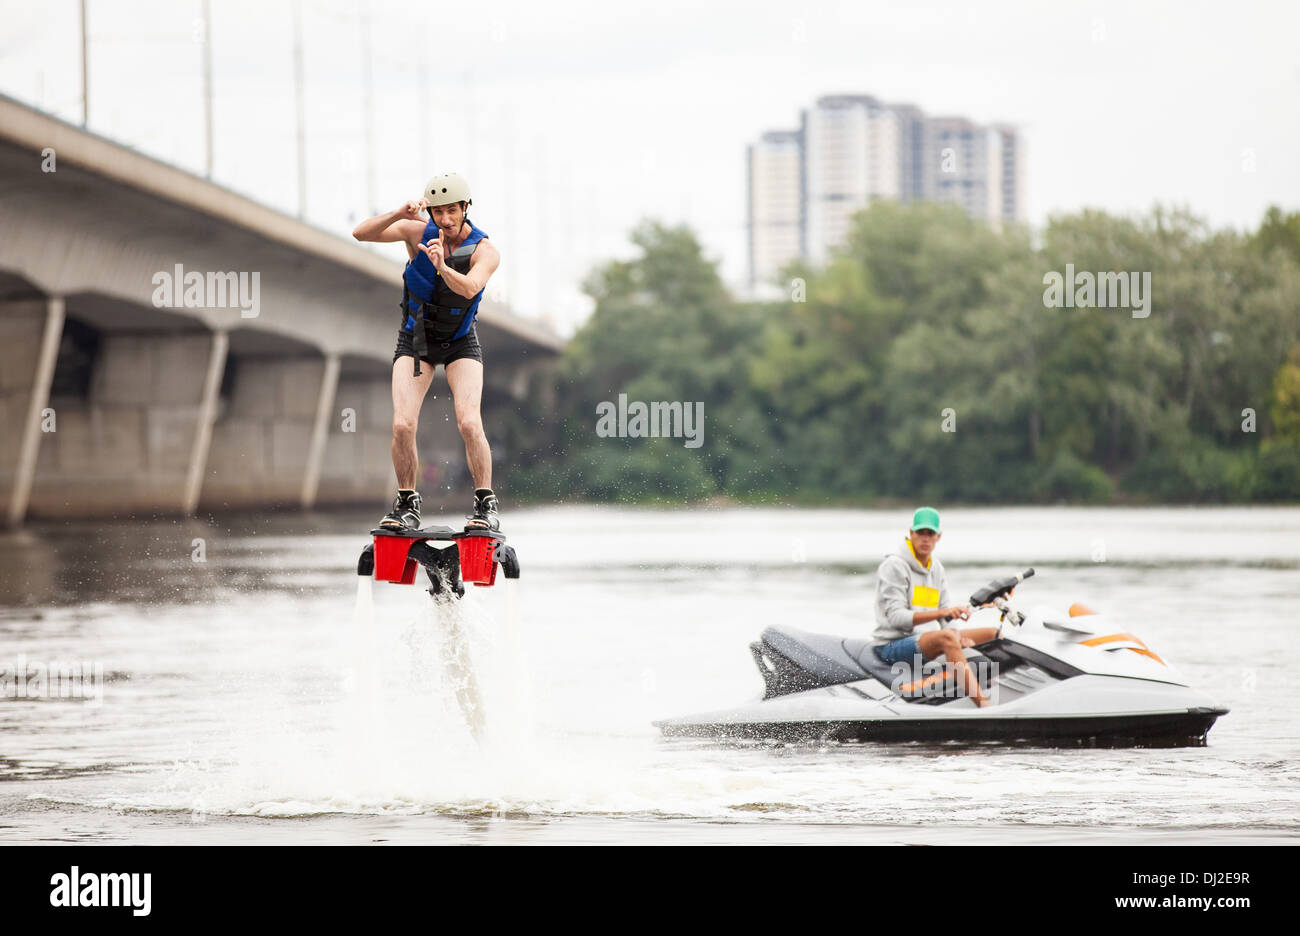 Young man on flyboard pretending taking picture, humorous aspect Stock Photo